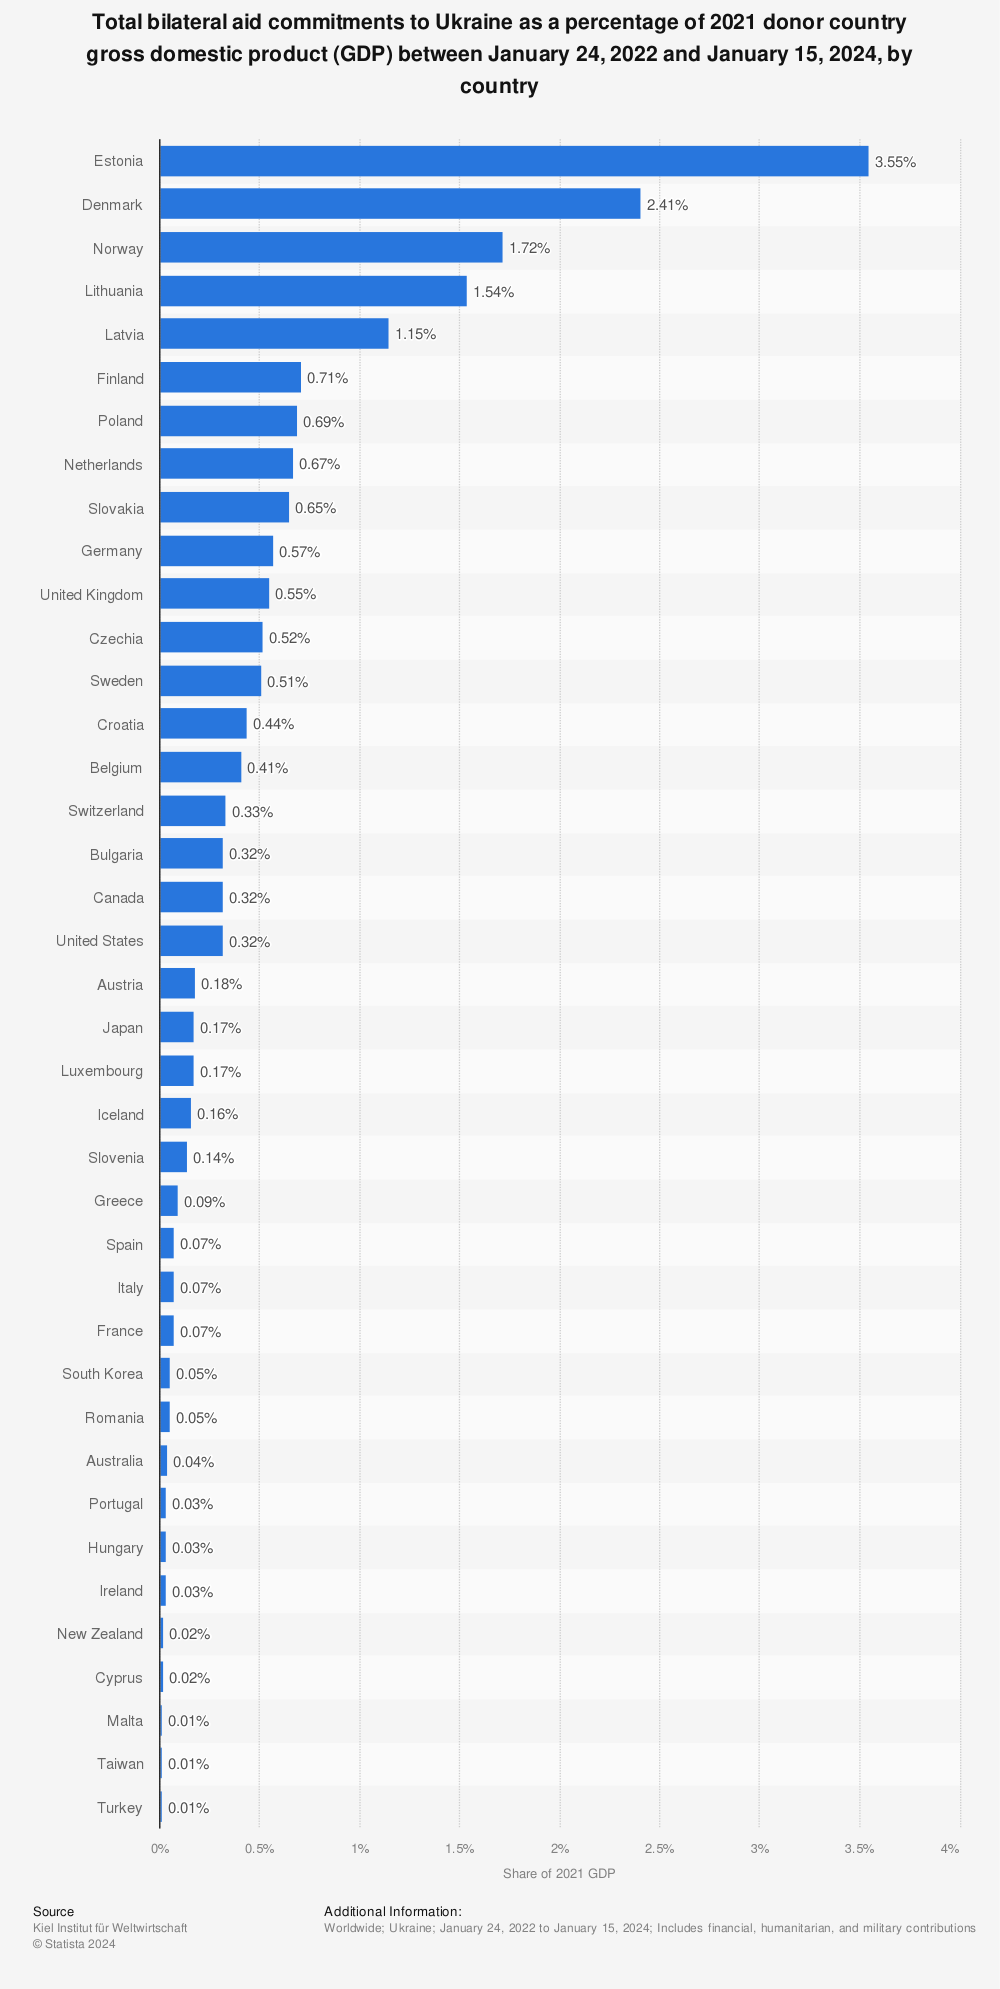 Statistic: Total bilateral aid commitments to Ukraine as a percentage of donor gross domestic product (GDP) between January 24, 2022 and January 15, 2023, by country | Statista